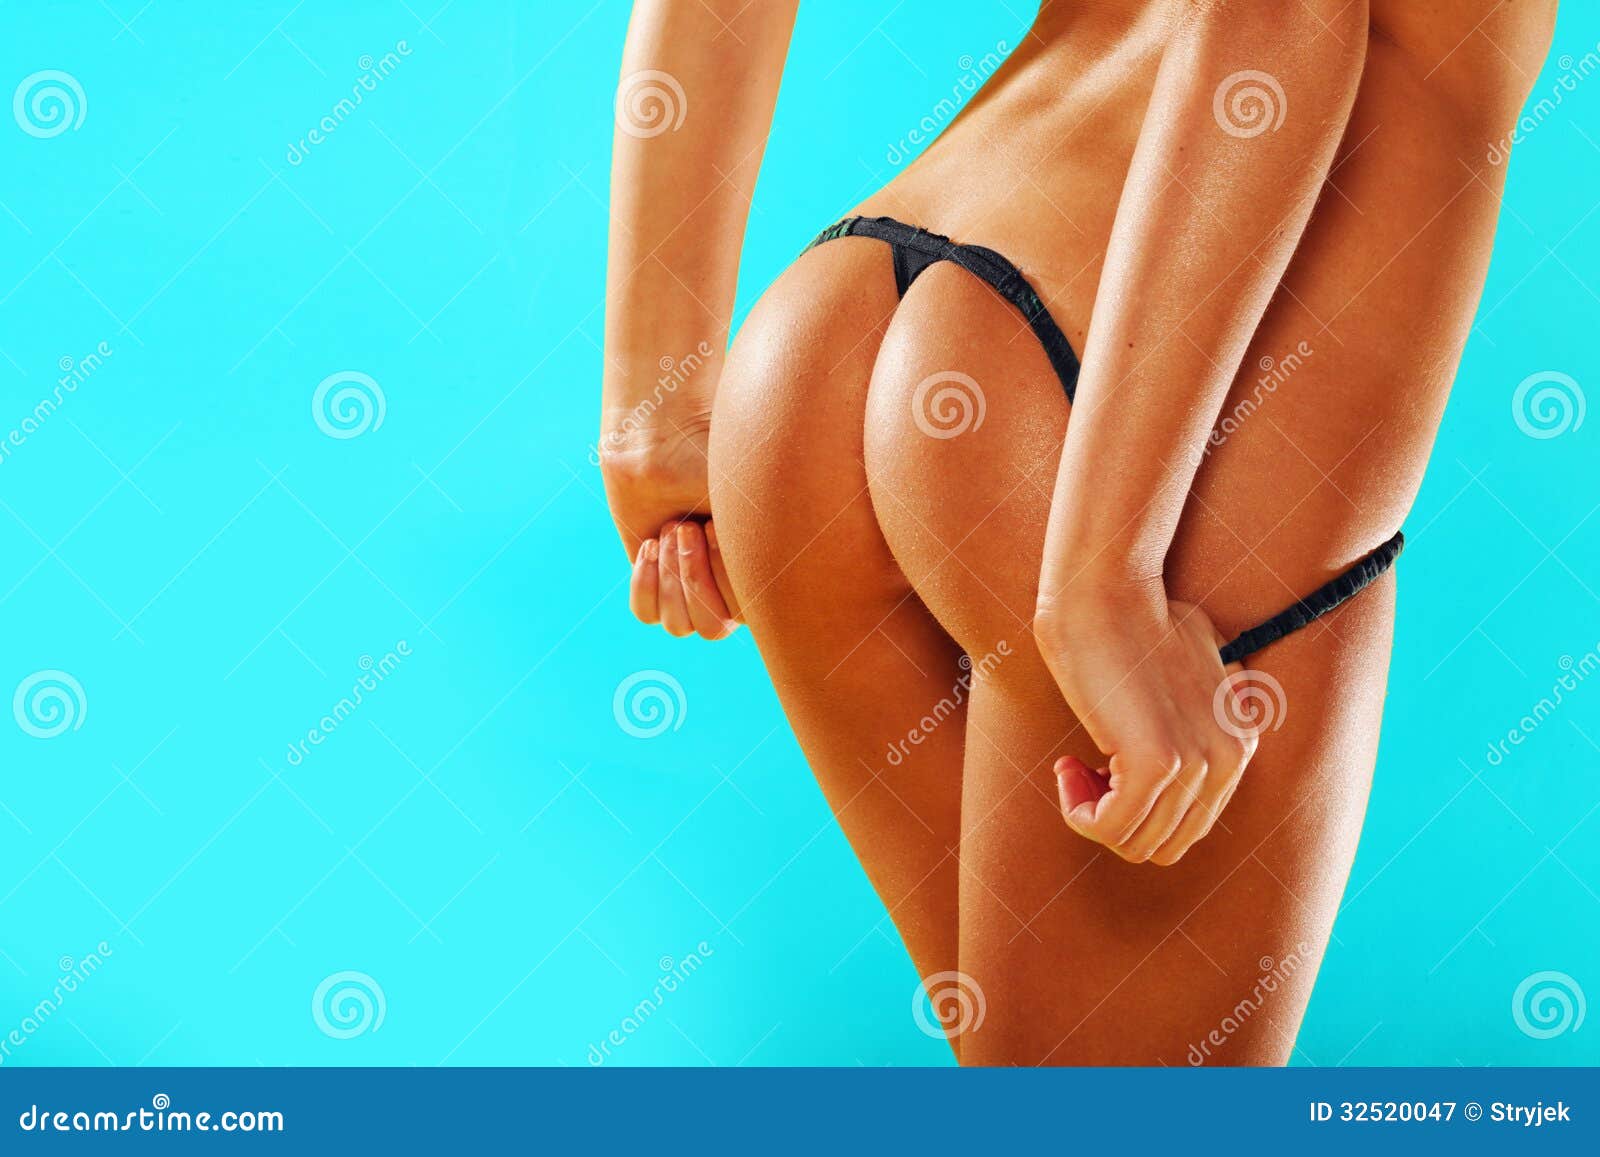 3,900+ Woman G String Pics Stock Photos, Pictures & Royalty-Free Images -  iStock